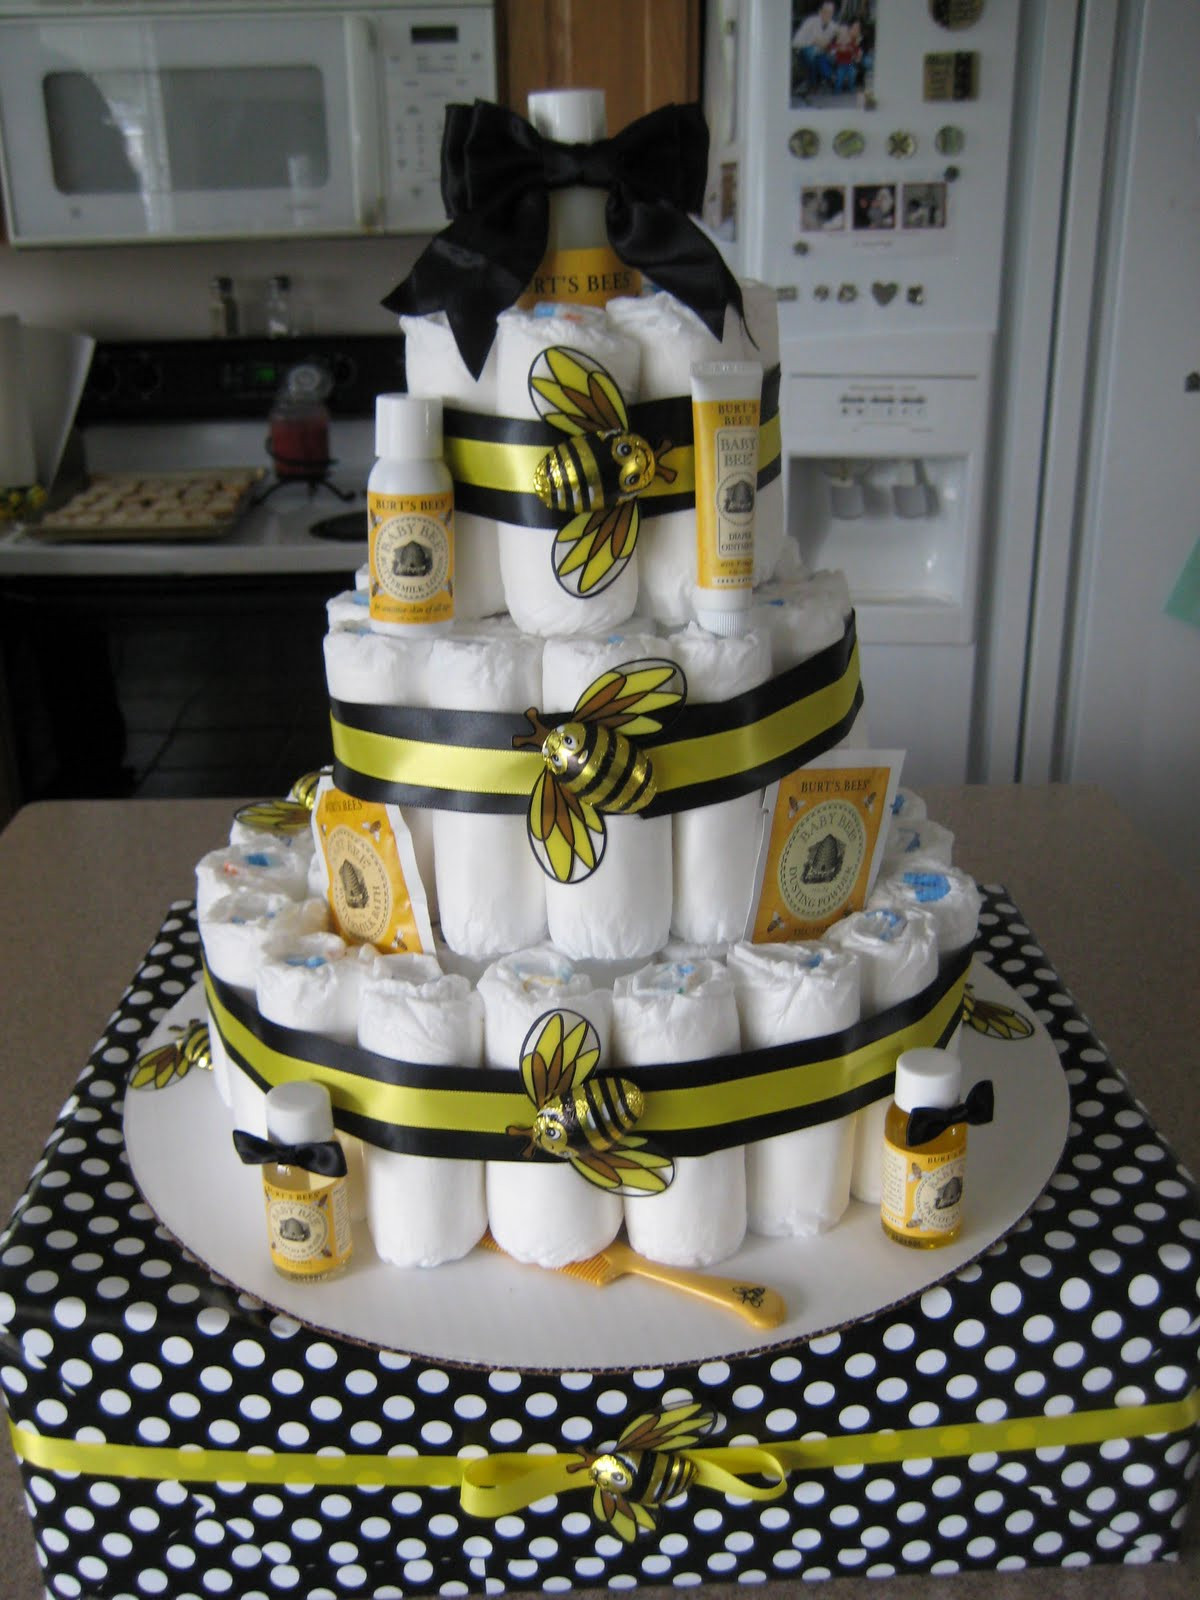 Bumble Bee Baby Shower Decorations Ideas
 Bumble Bee Baby Shower Decorations